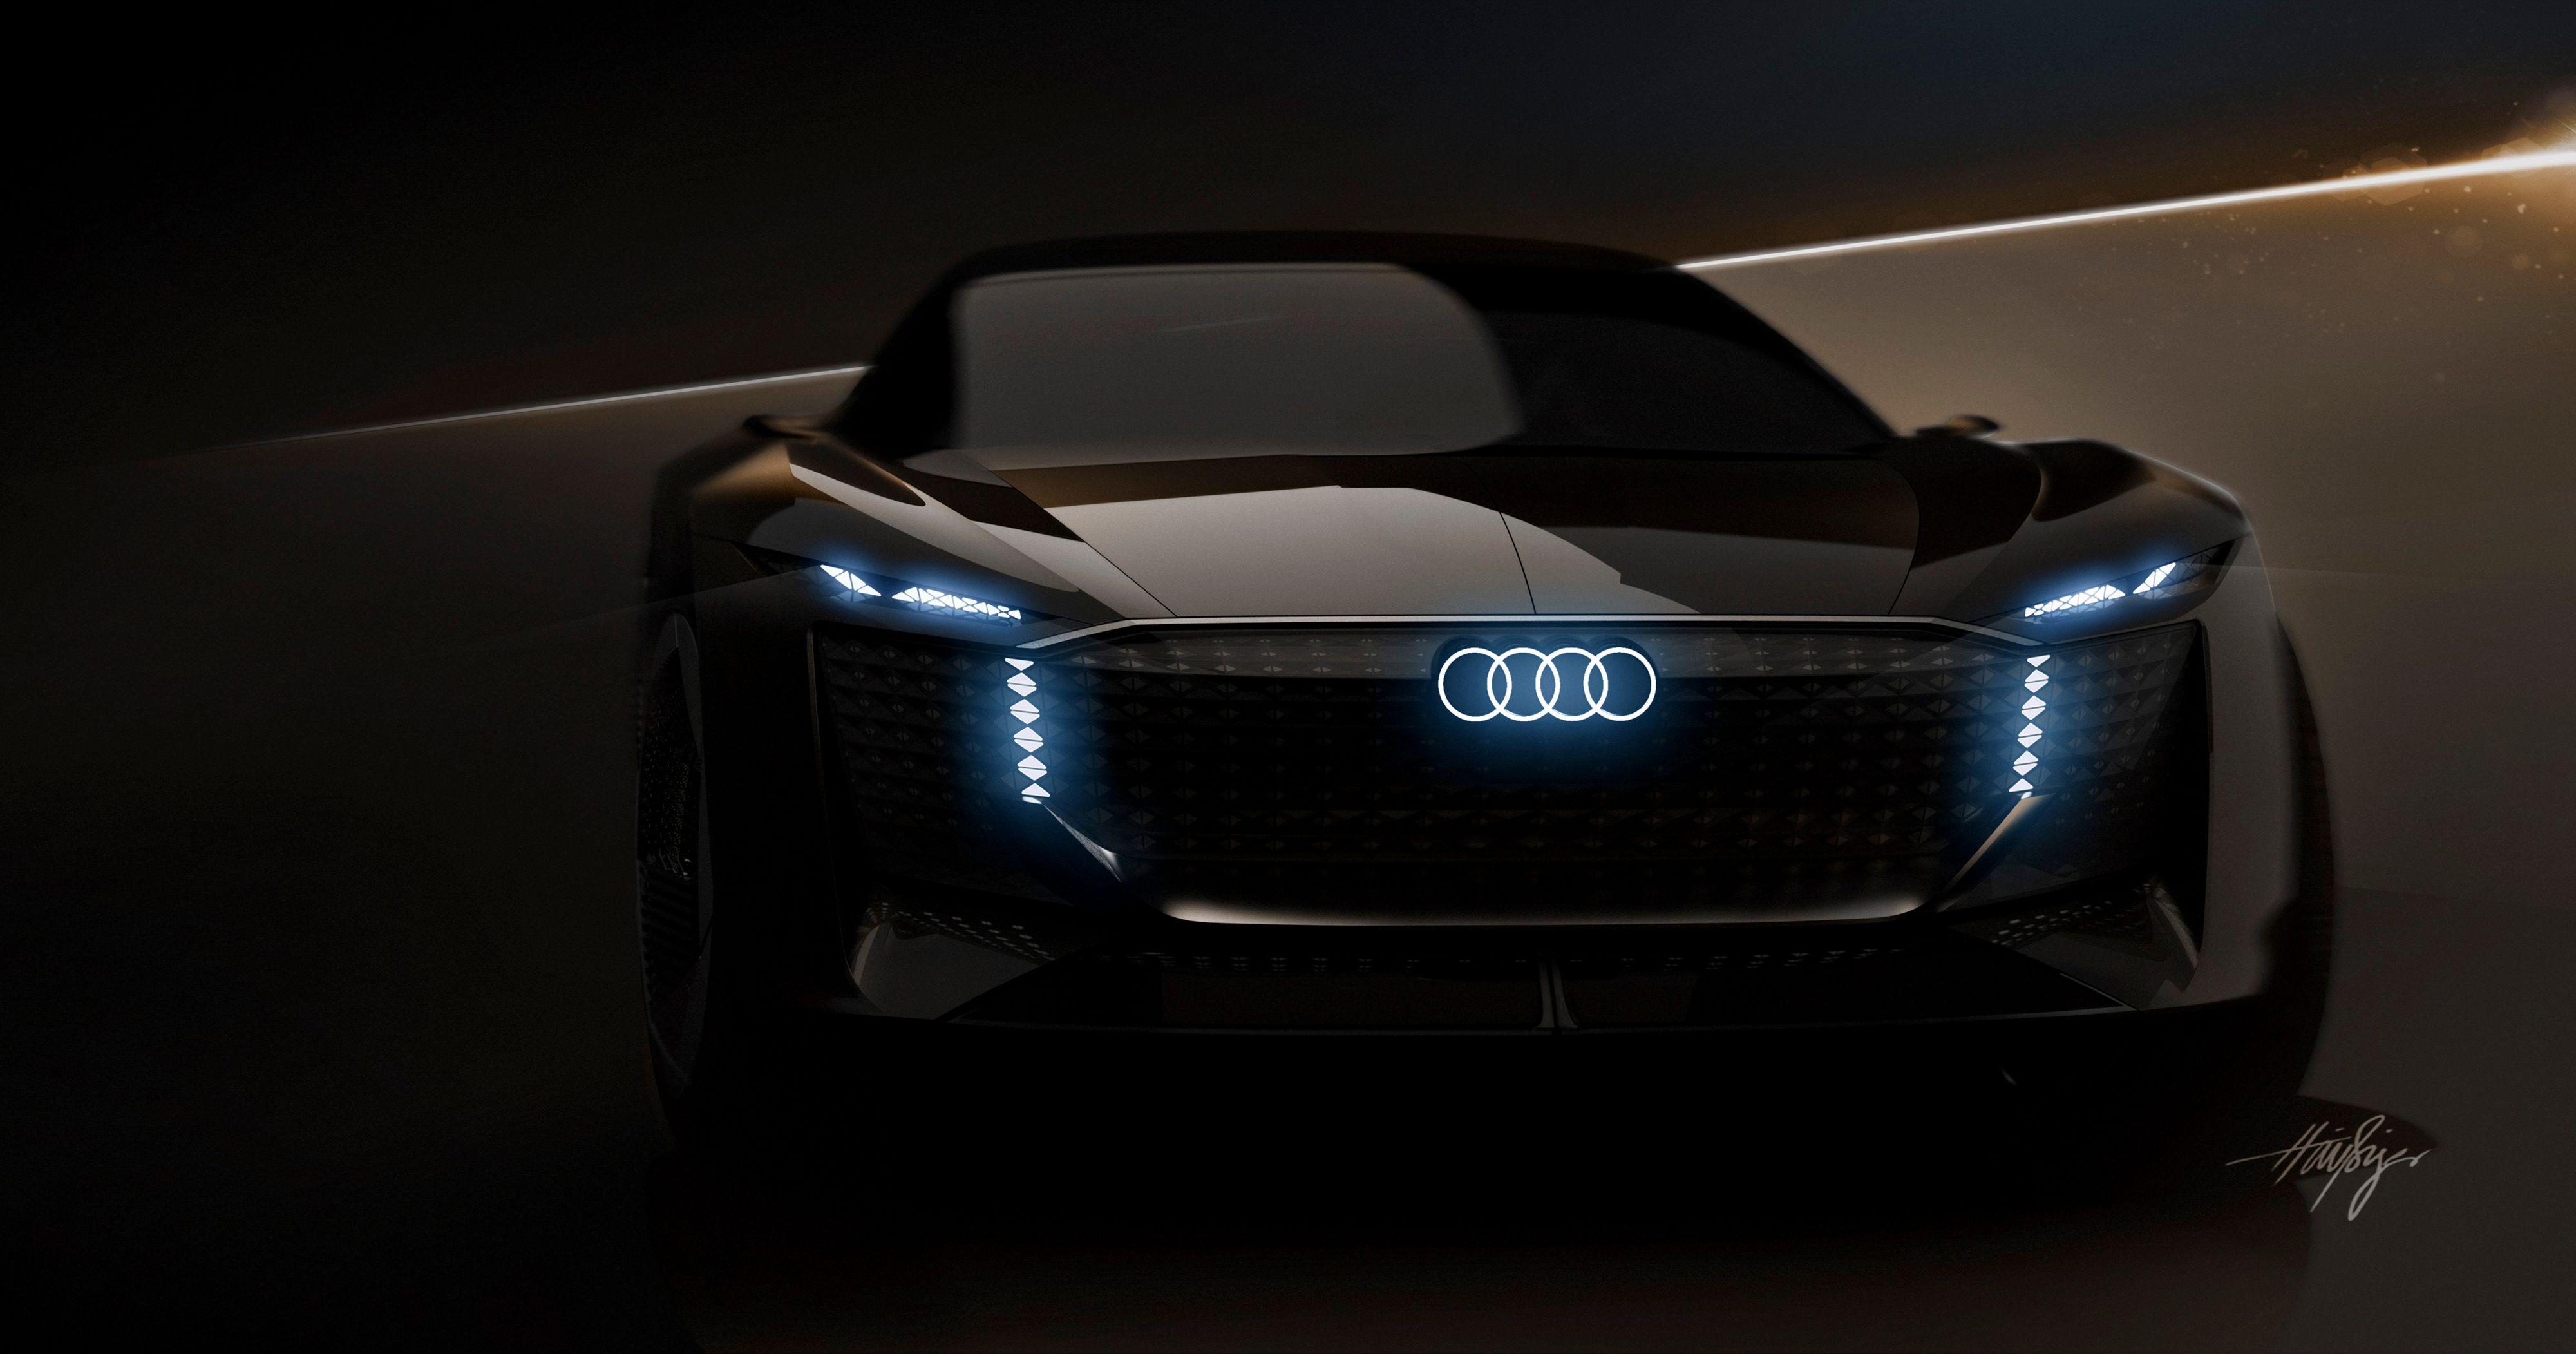 2021 Audi Skysphere Concept - A Transformer That Can Change Shape On The Fly